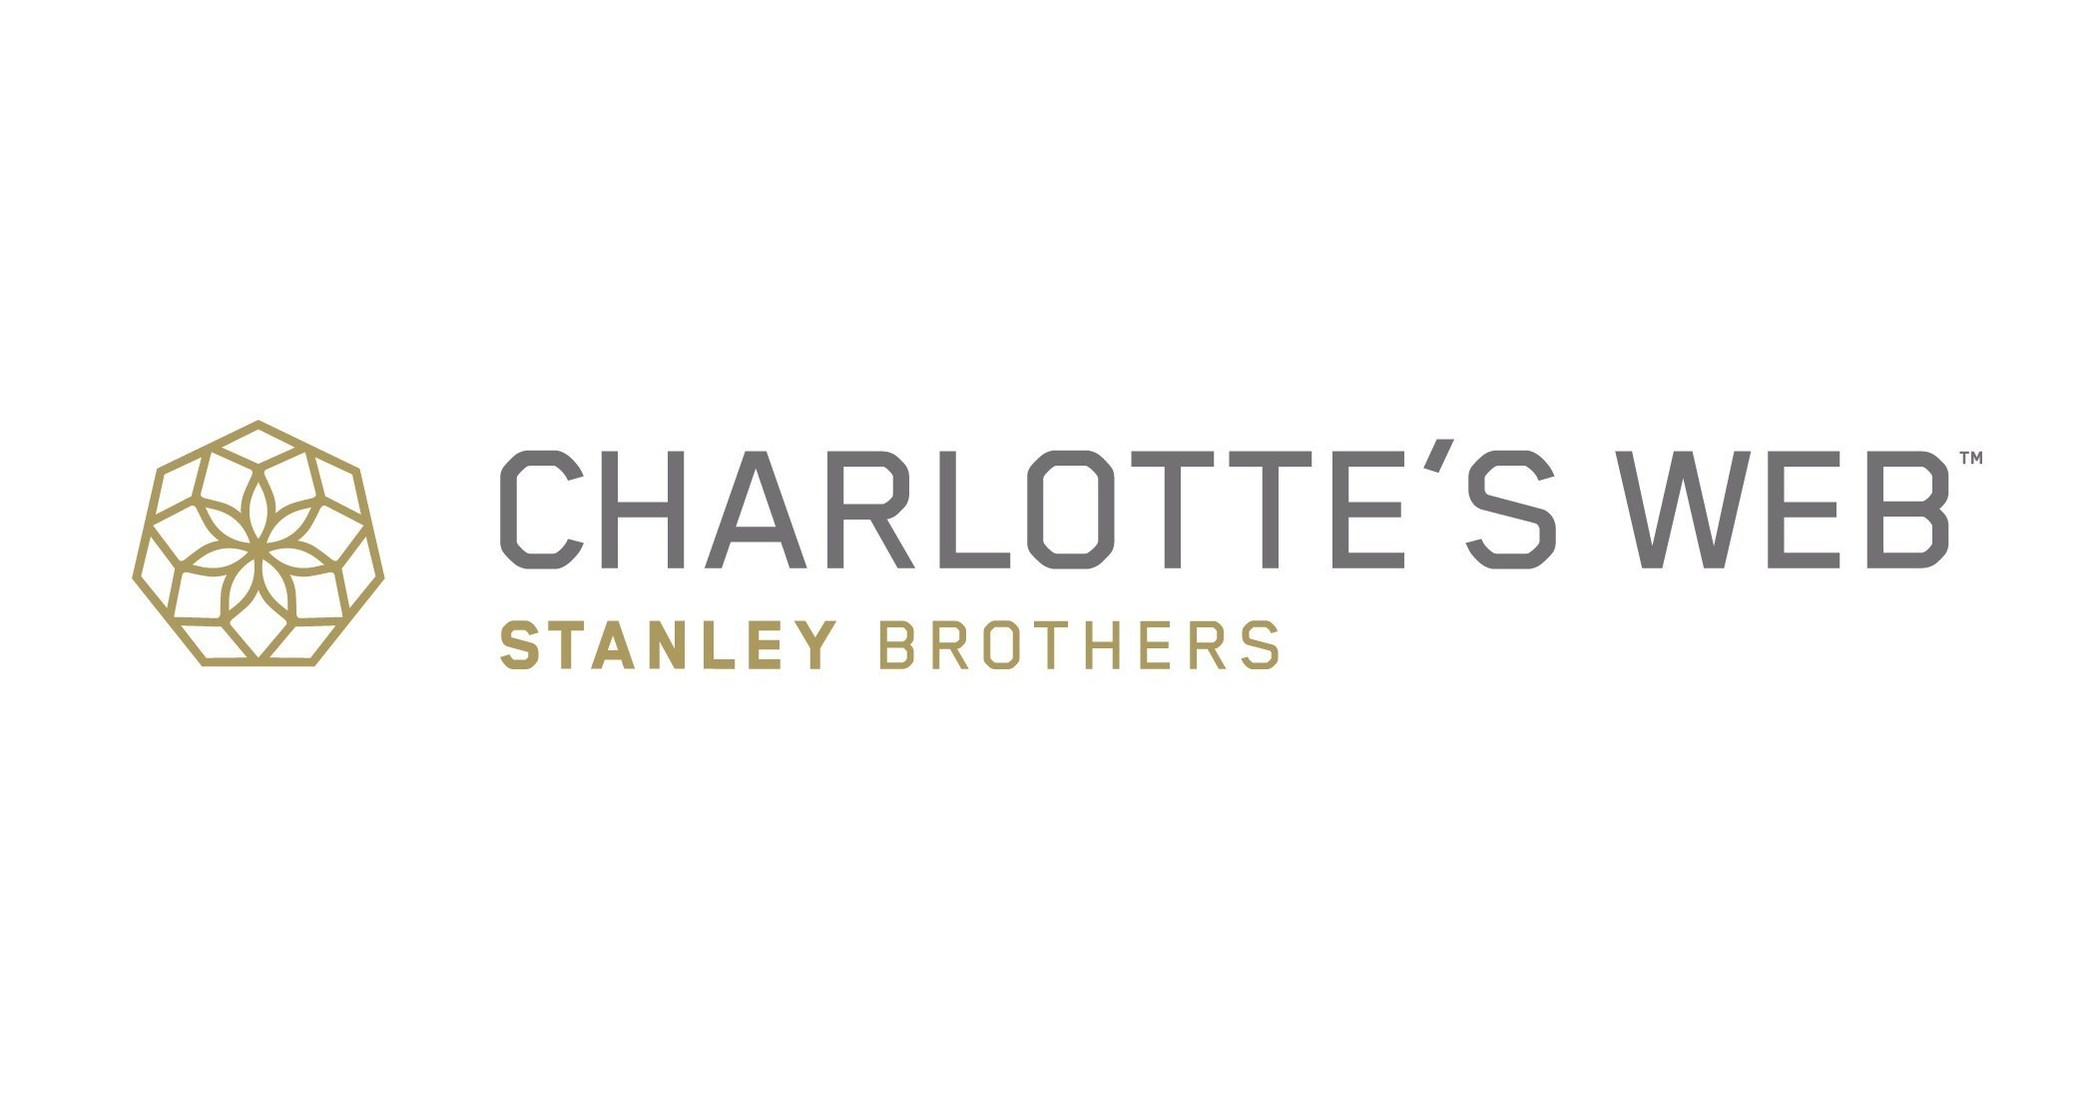  Charlotte's Web Appoints Jessica Saxton as Chief Financial Officer 